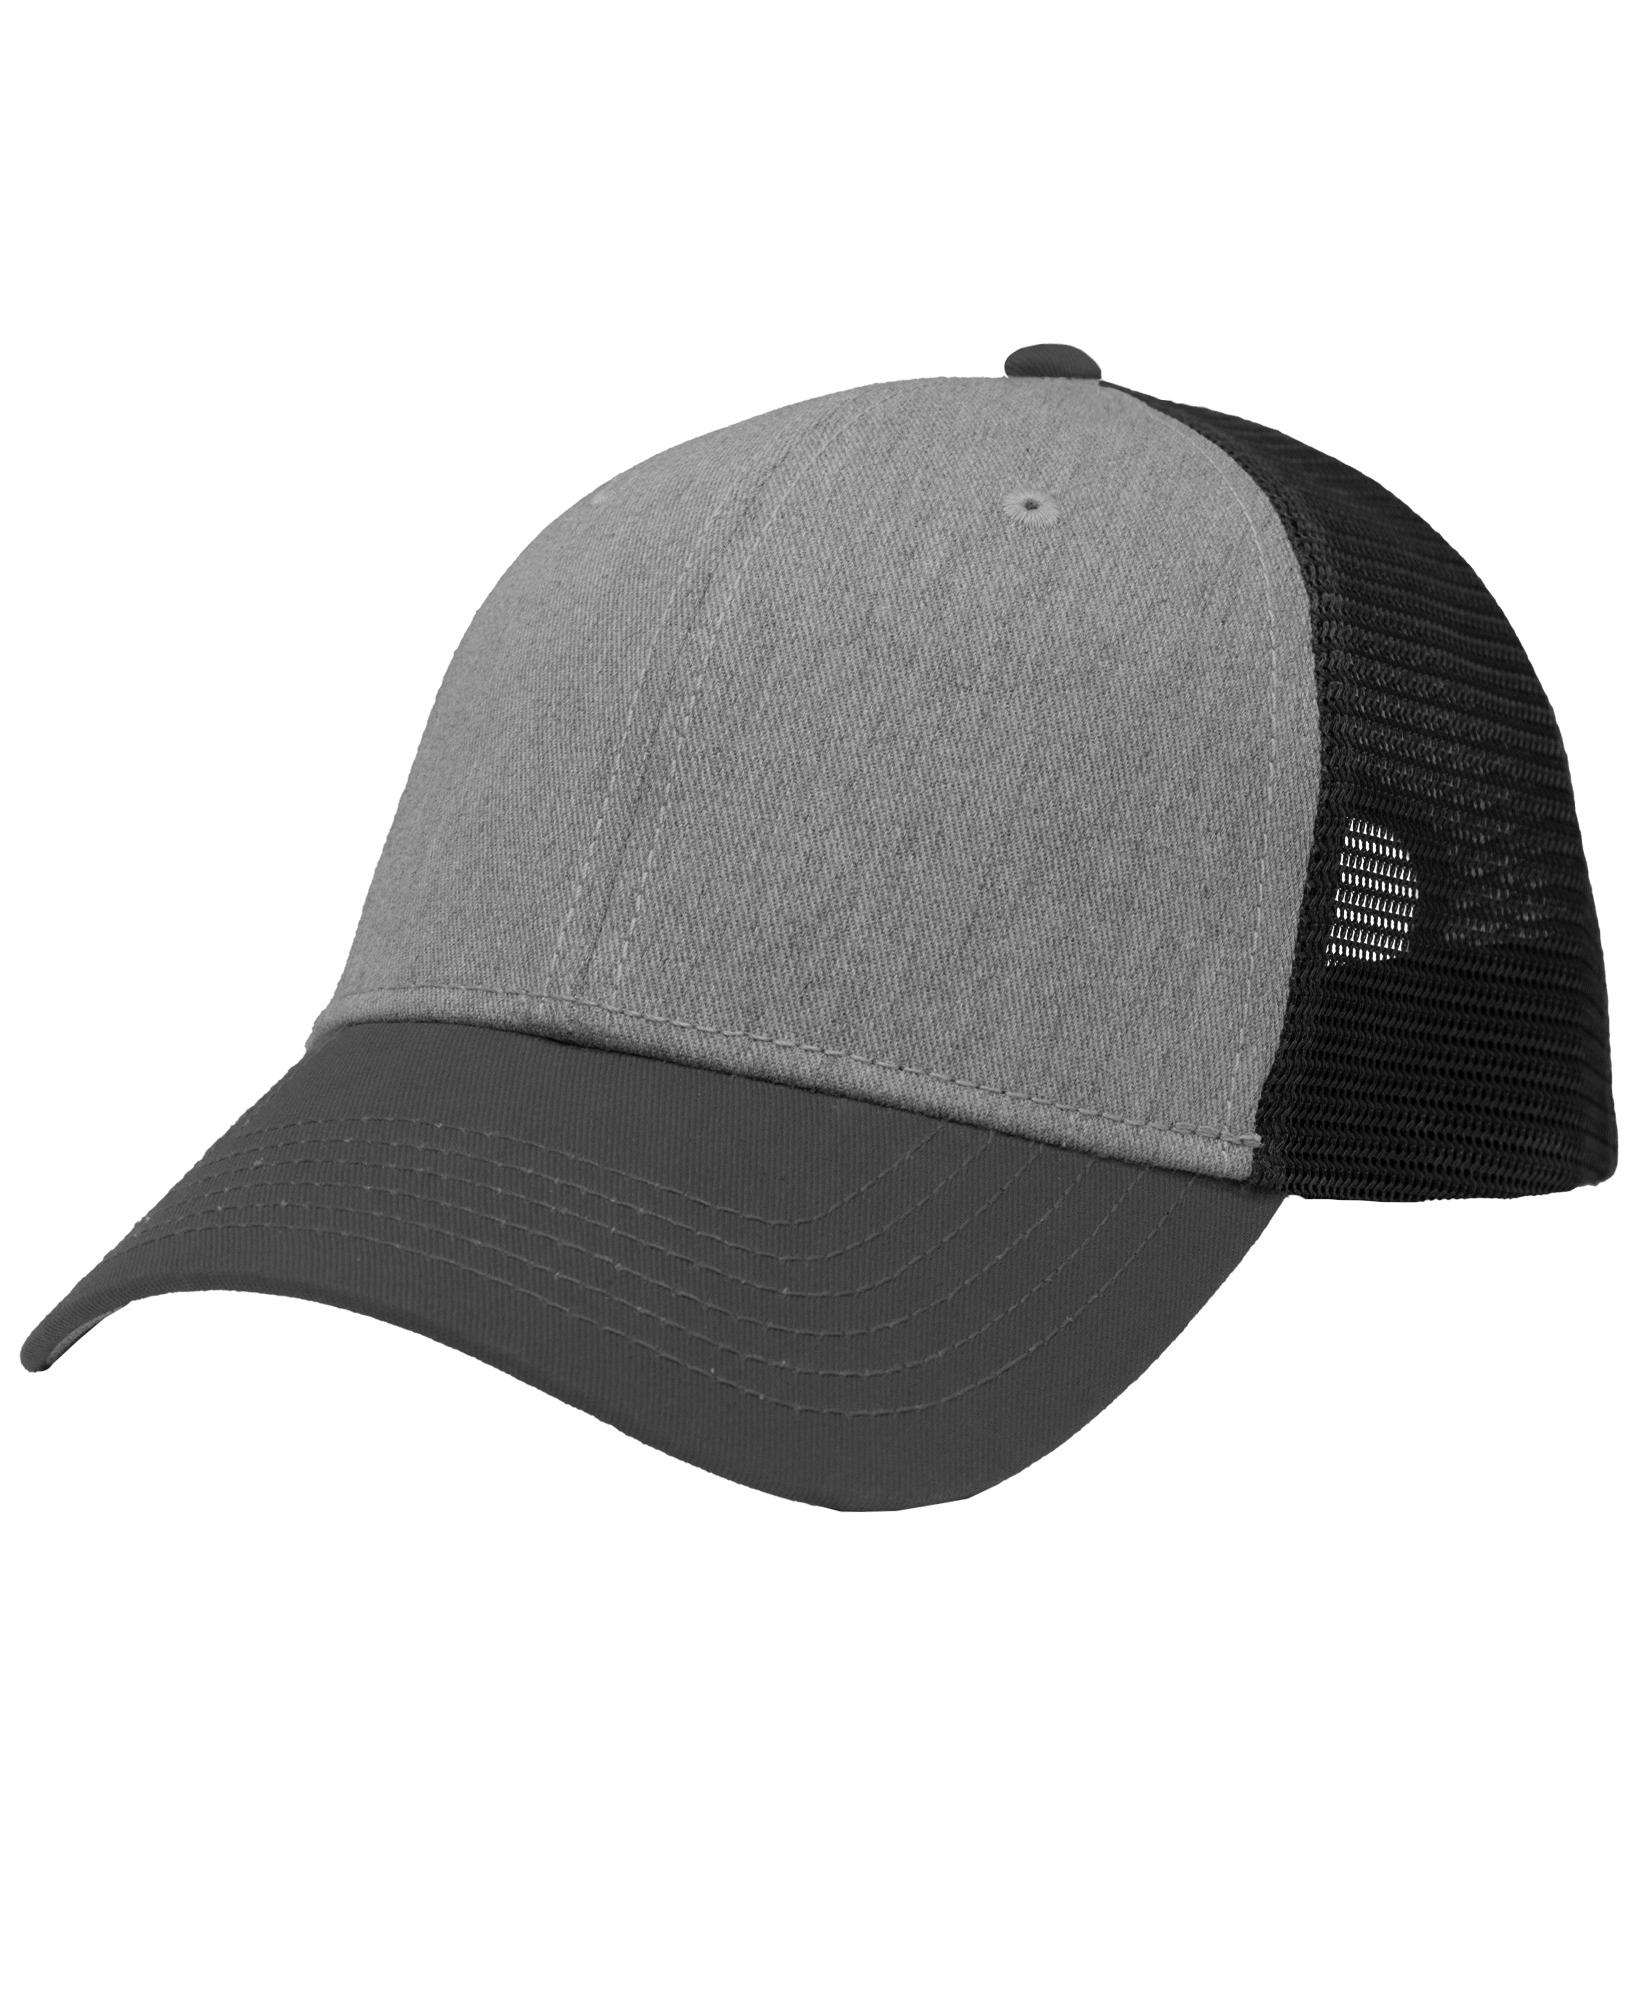 click to view Heather Grey/ Charcoal/ Charcoal